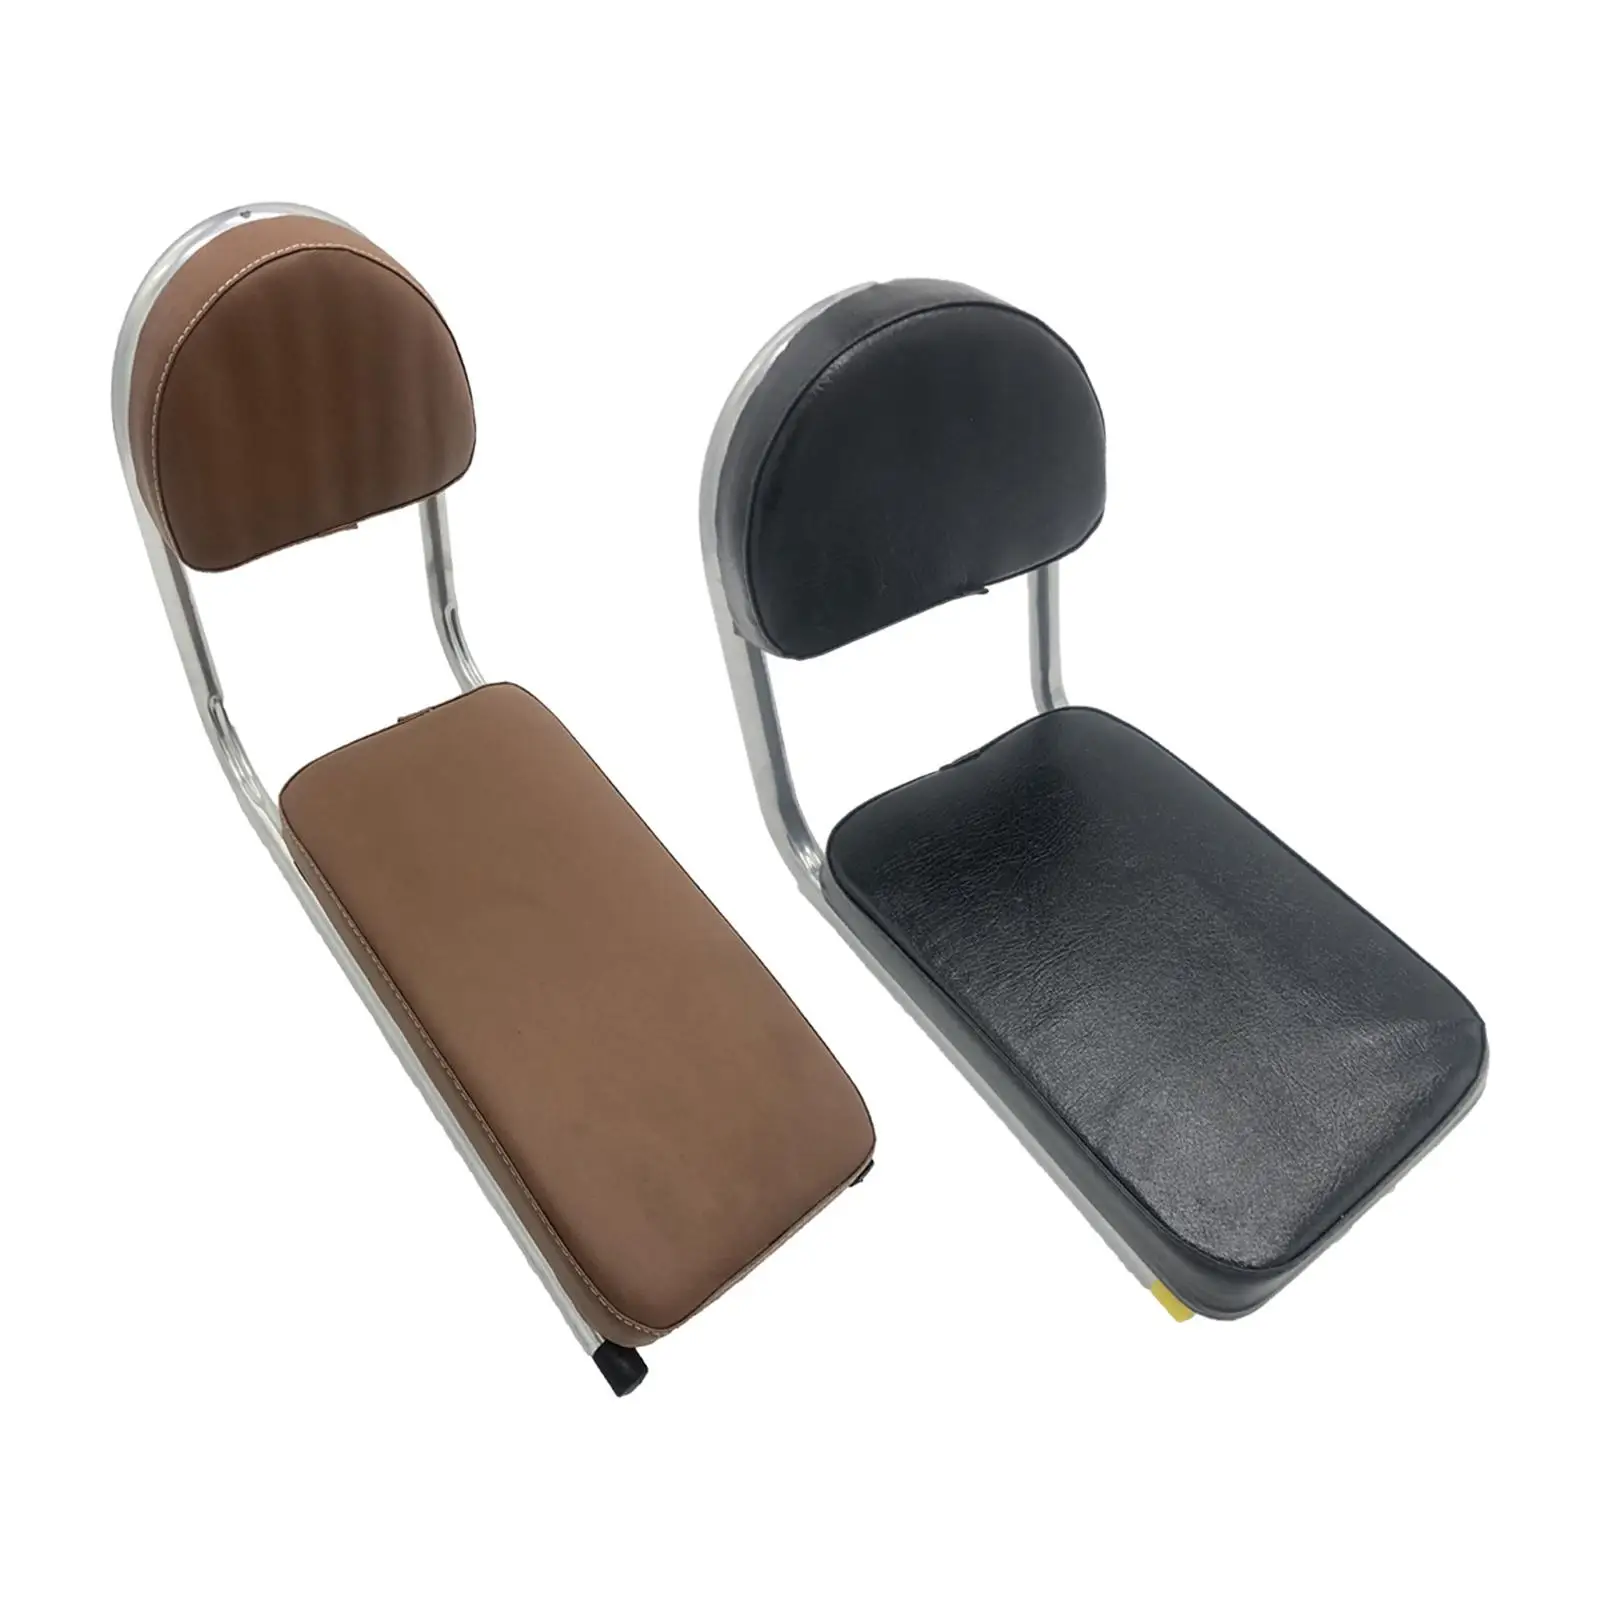 Bicycle Rear Seat Cushion PU Leather with Backrest for Riding Touring Biking